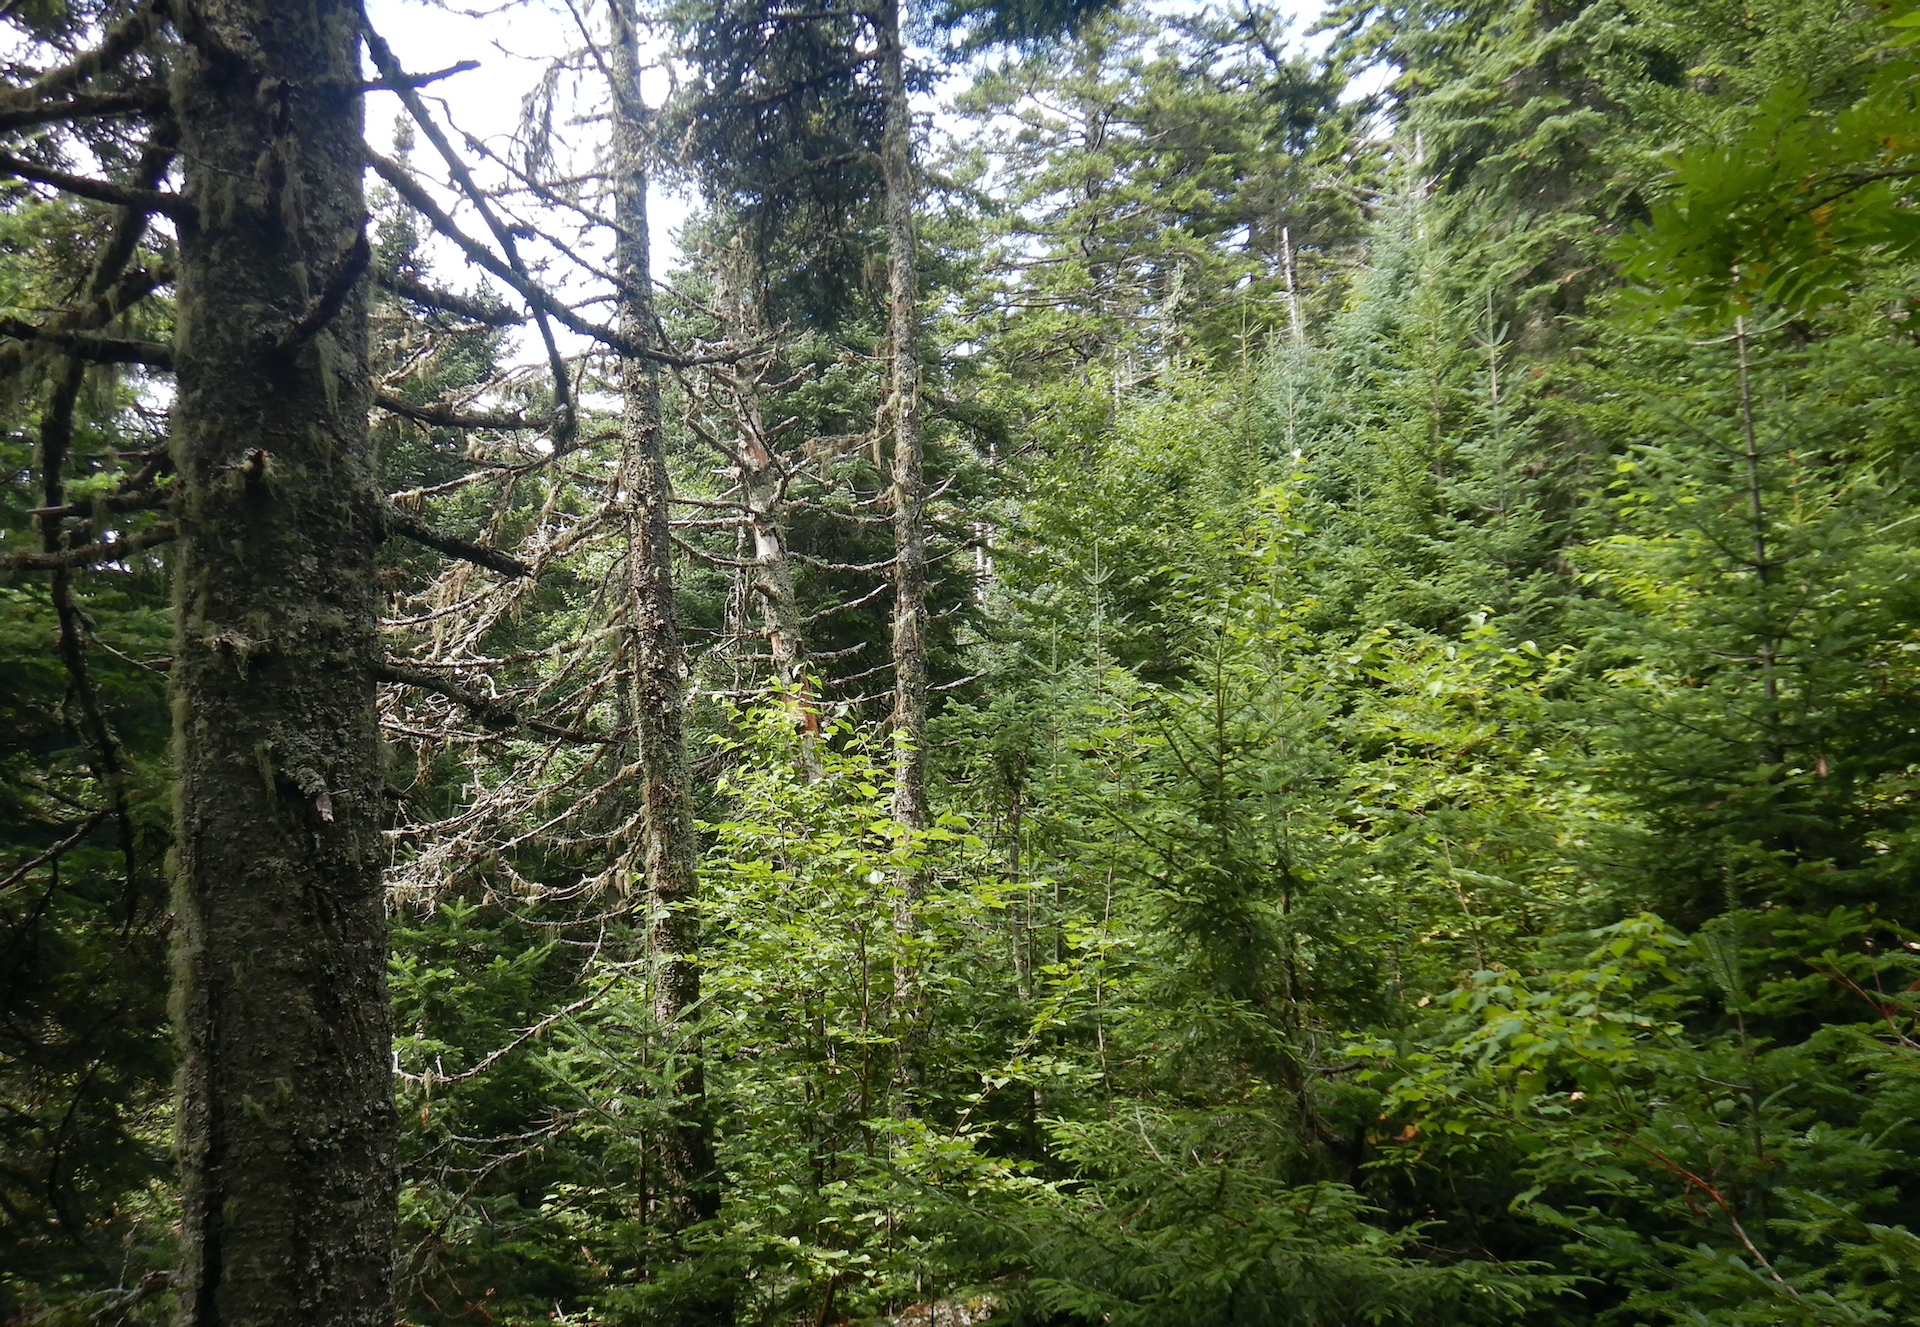 View of forest that is a mix of young and old spruce and fir trees. Dead standing trees are among them. A large trunk is at left.